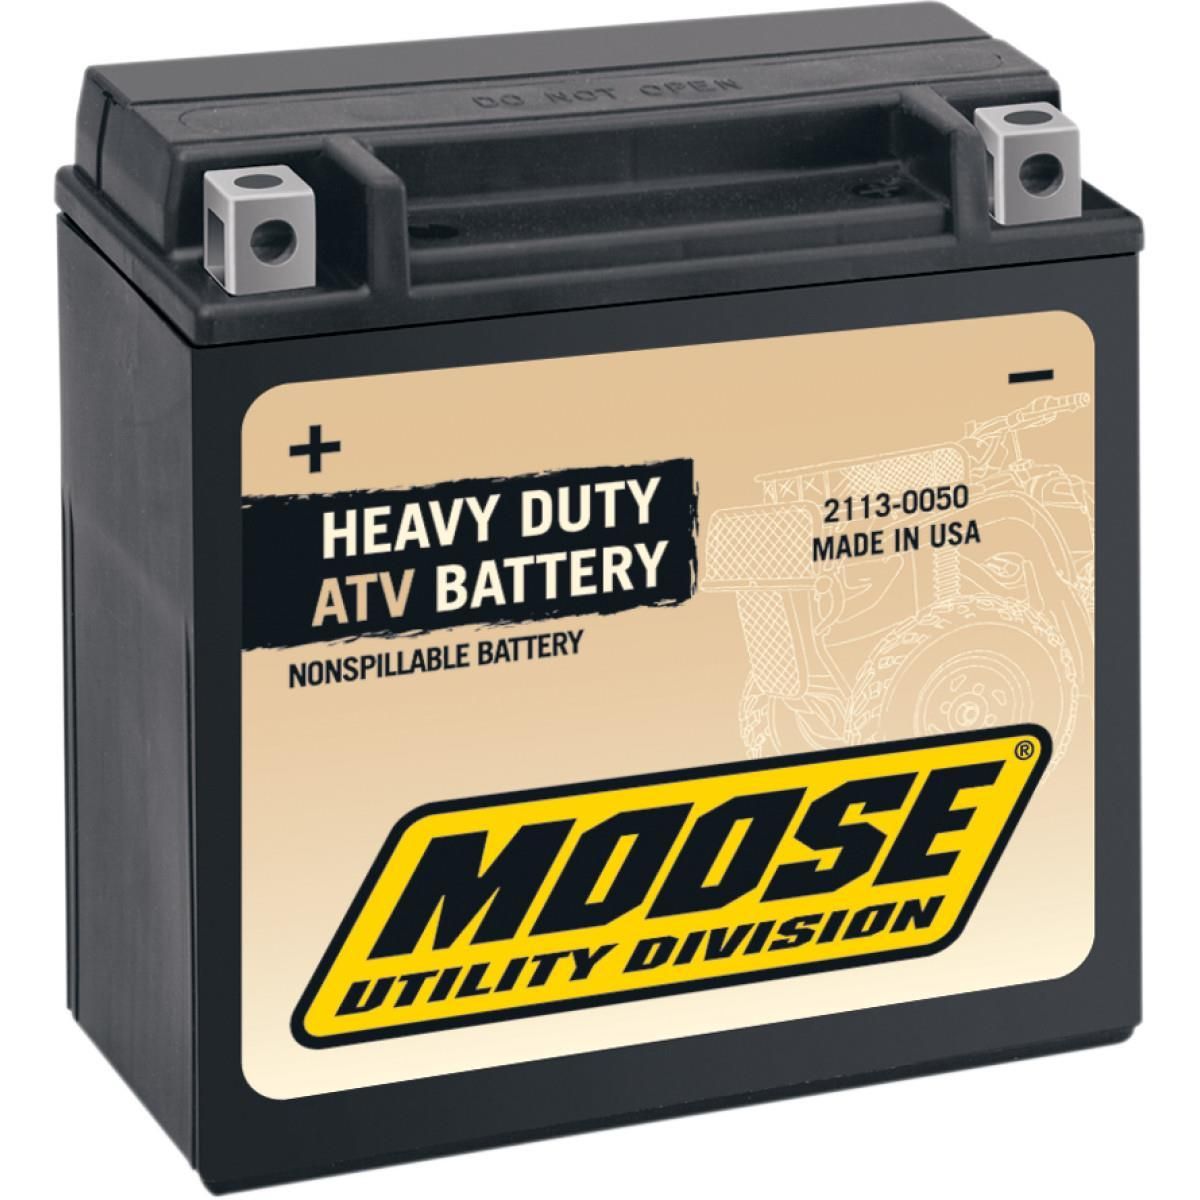 2950-MOOSE-UTILI-21130046 Factory-Activated AGM Maintenance-Free Battery